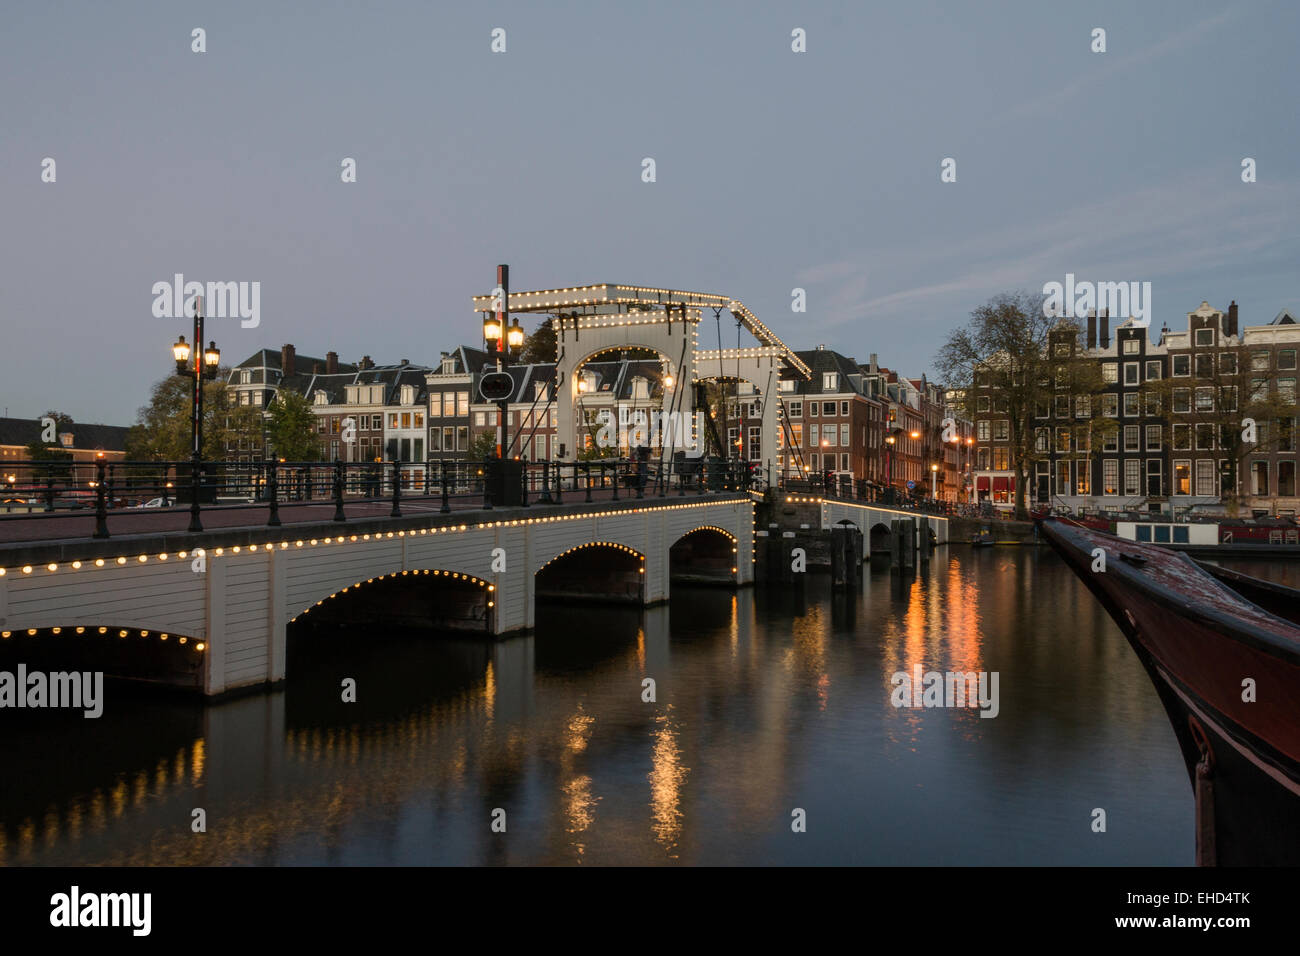 The Magere Brug or Skinny Bridge is a landmark in Amsterdam. It spans the river Amstel. Stock Photo